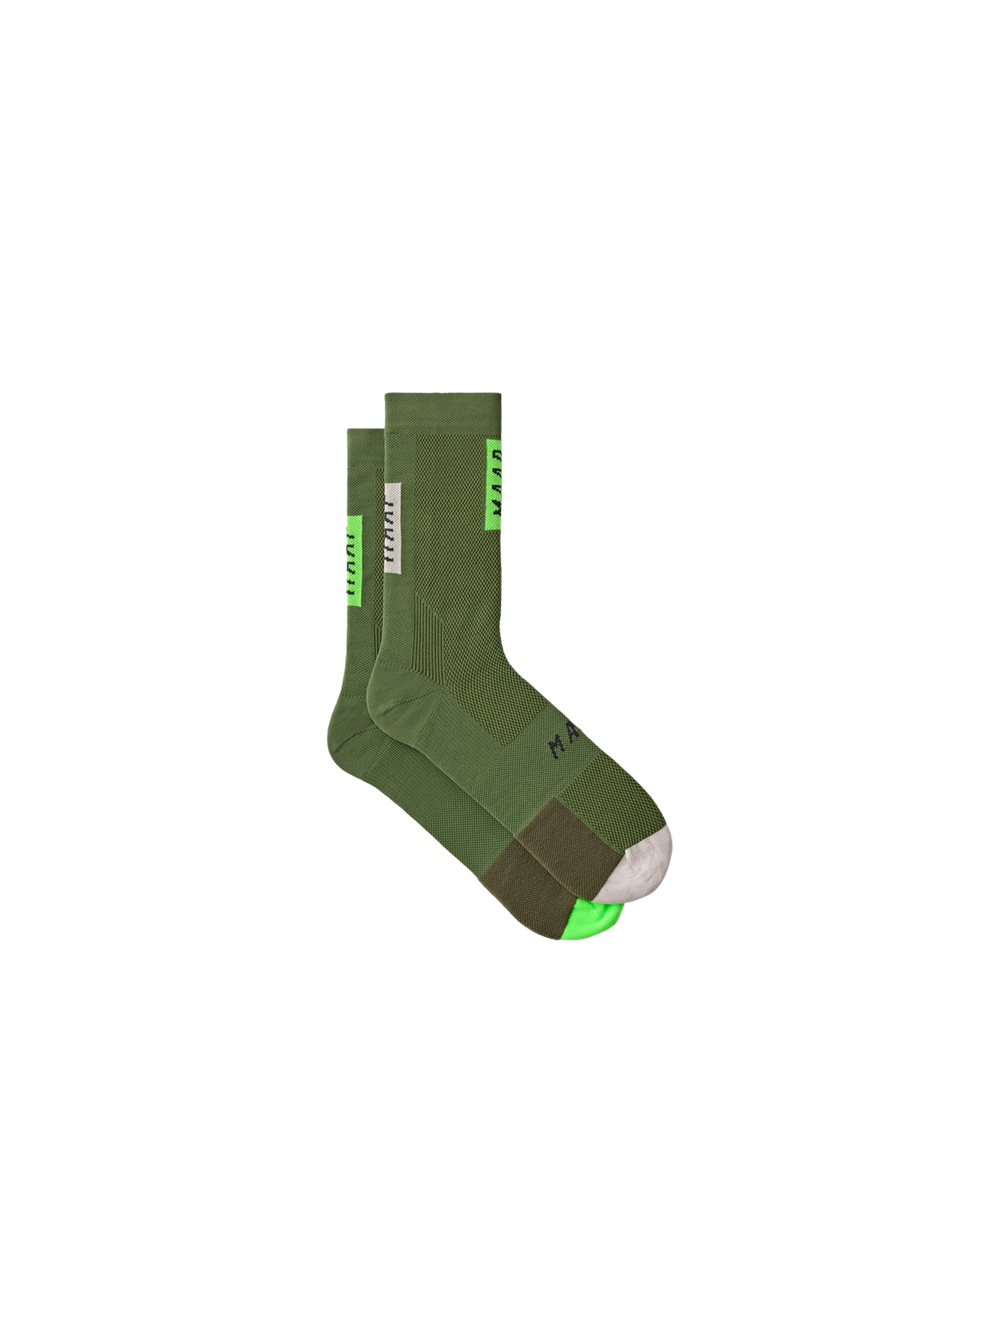 Product Image for System Sock